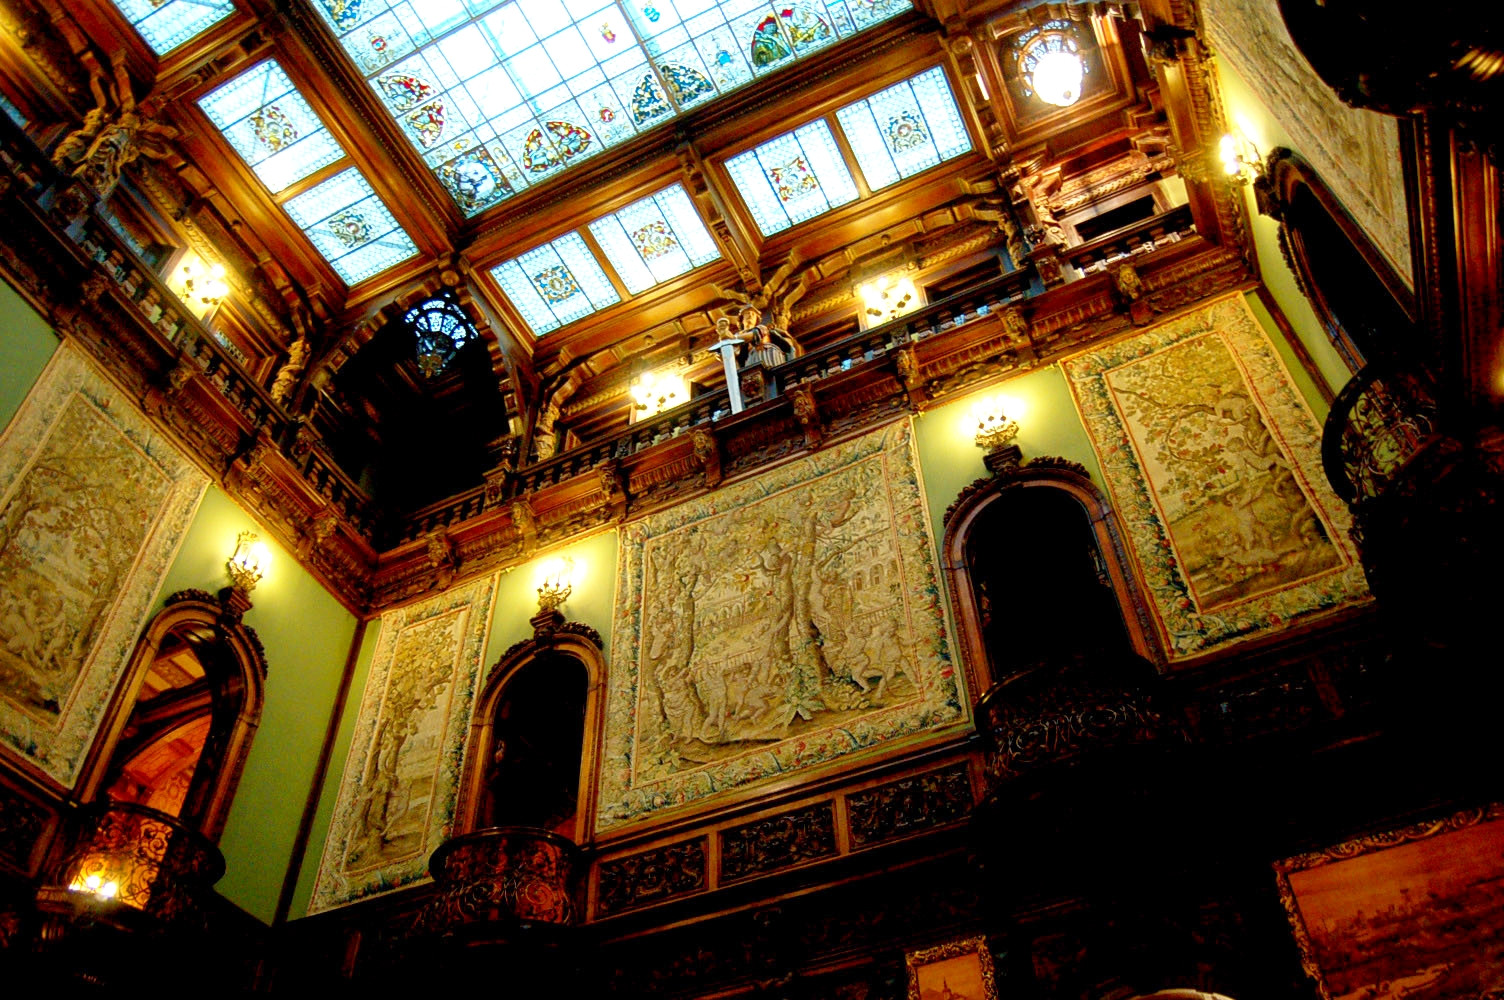 The 'Honor Hall' stained glass ceiling and carved woodwork. Credit Curious Expeditions